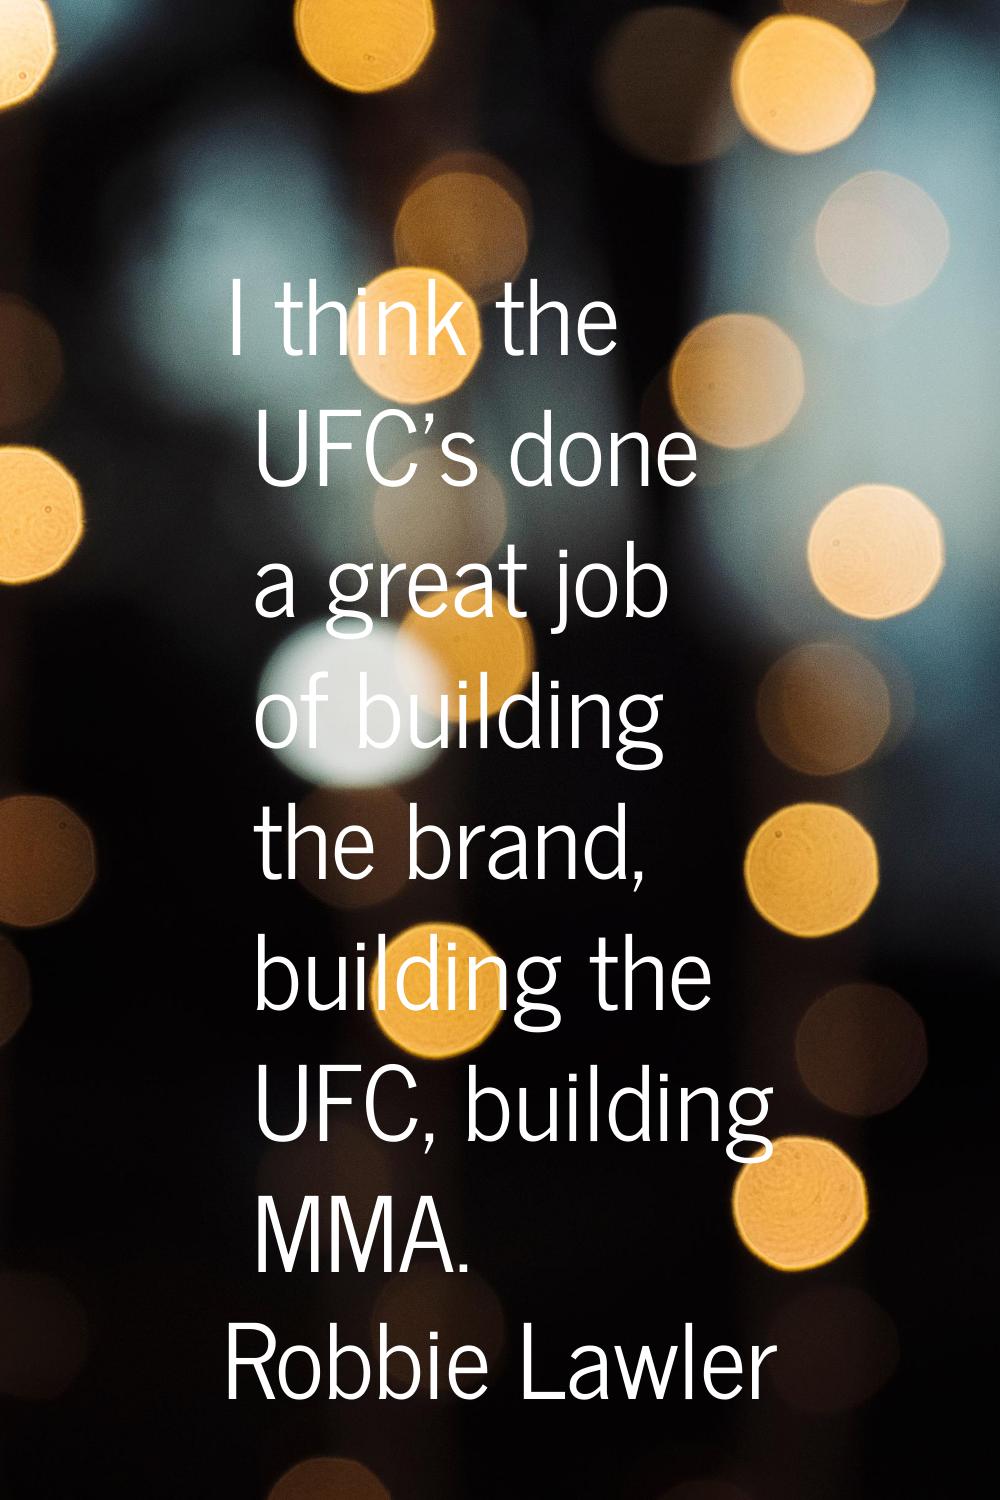 I think the UFC's done a great job of building the brand, building the UFC, building MMA.